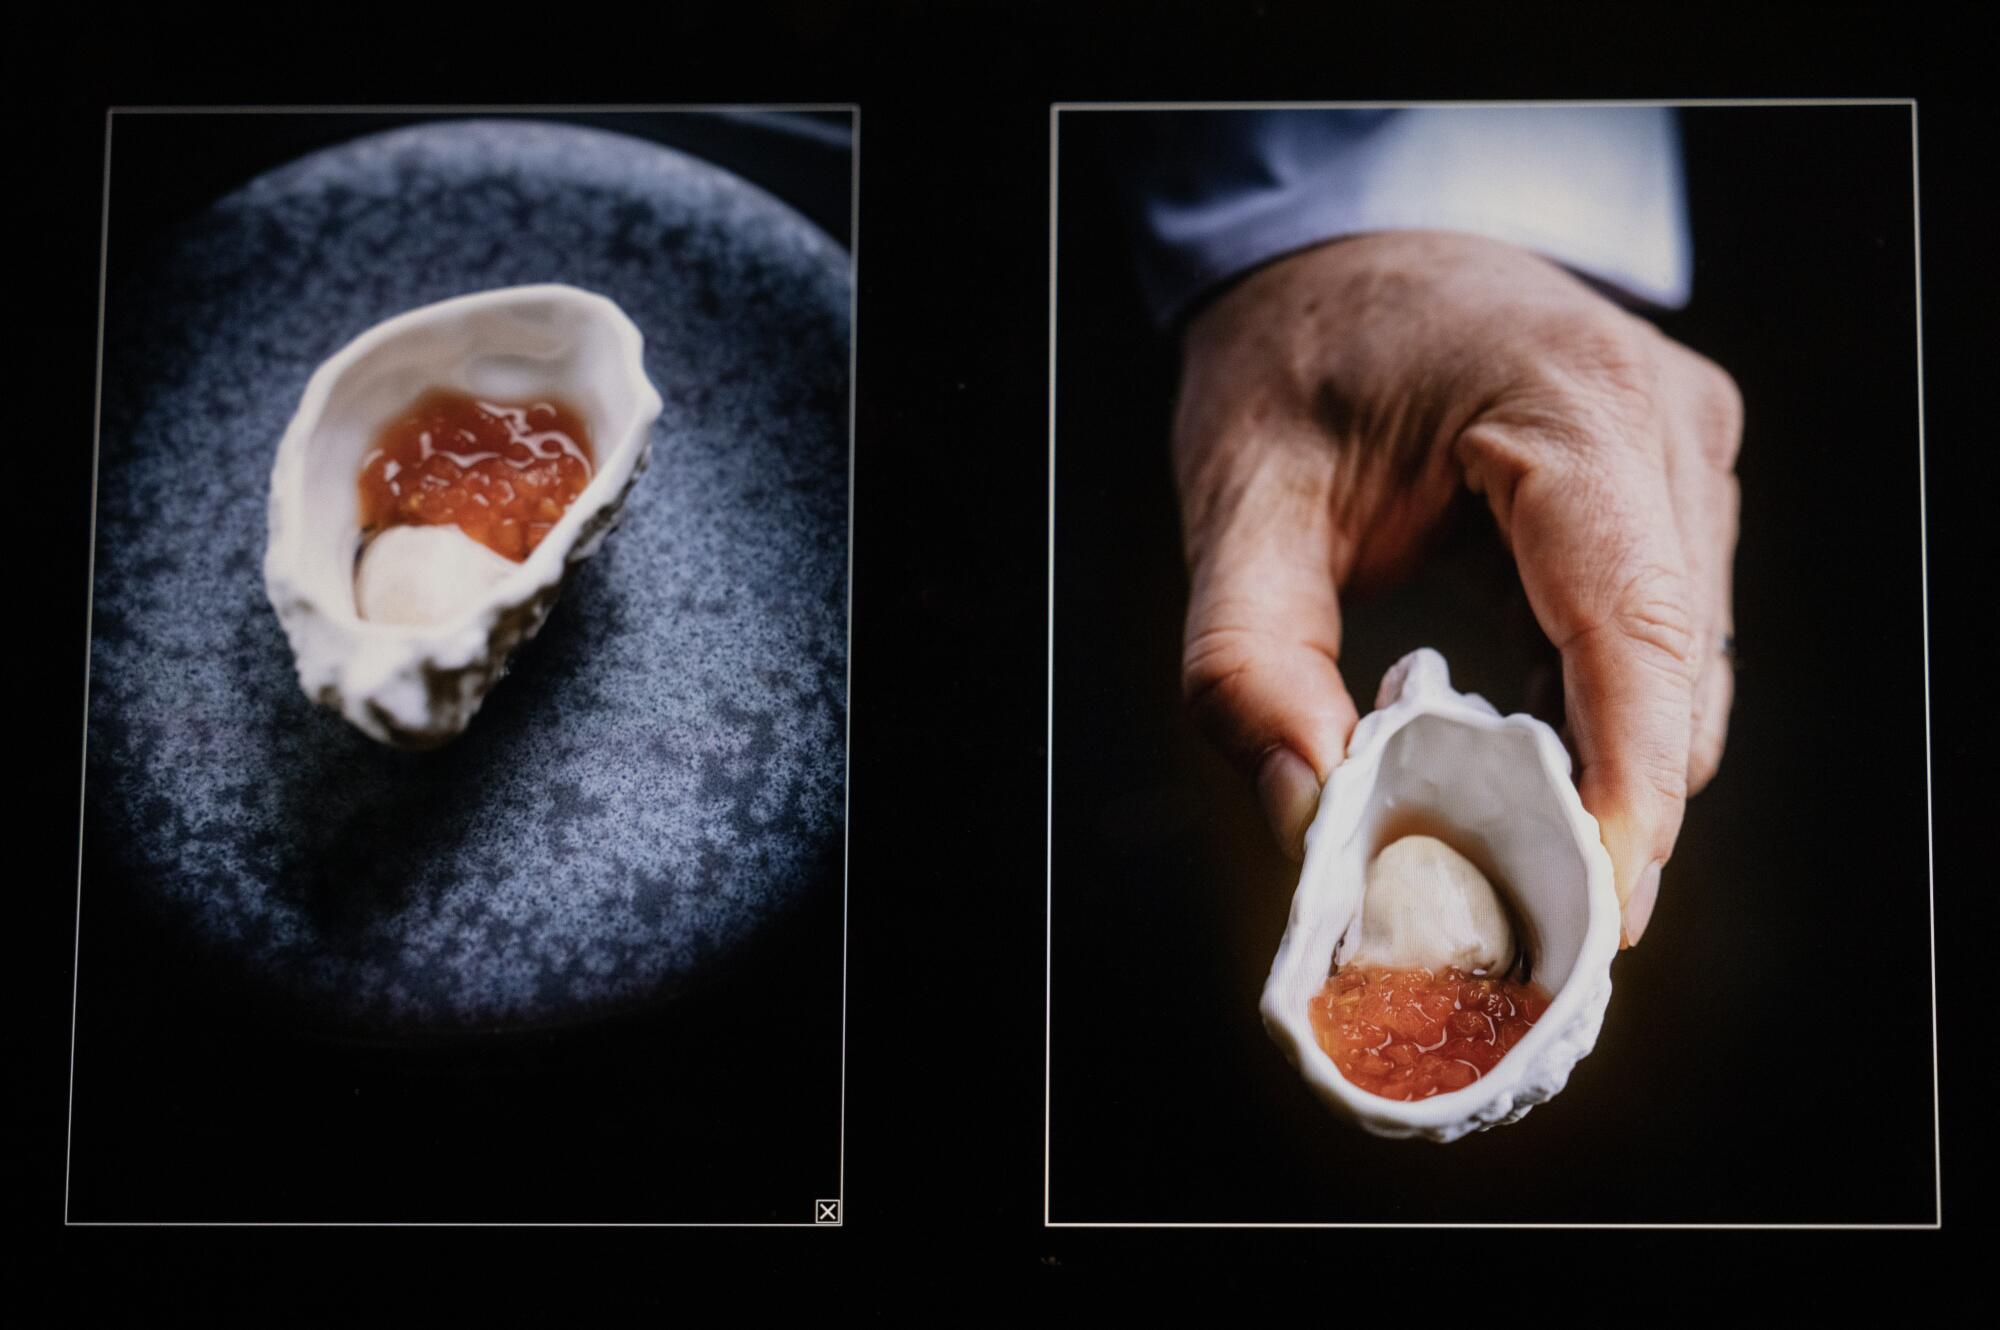 Photos of an oyster dish at Addison restaurant shot by Eric Wolfinger